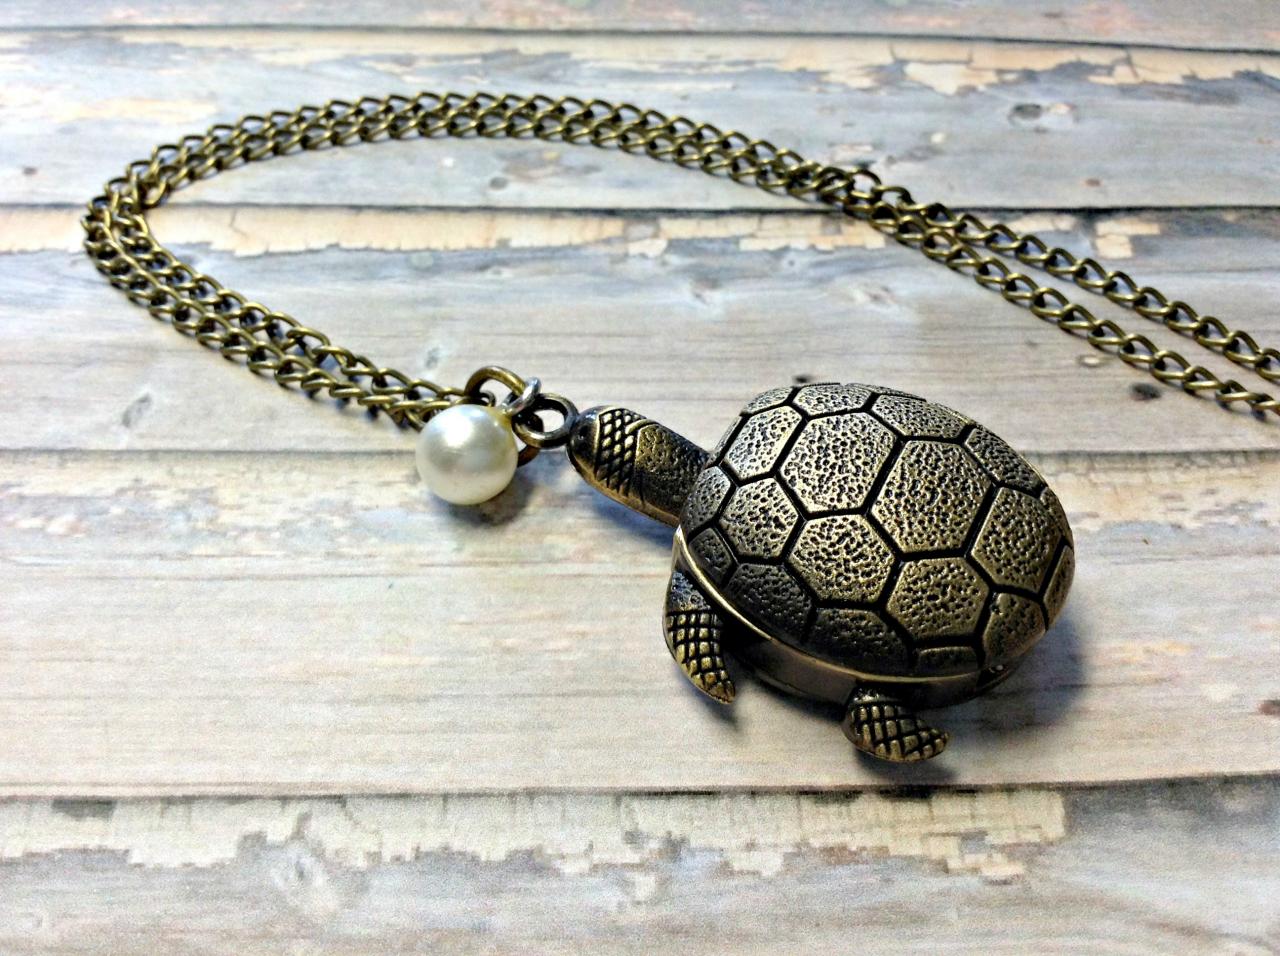 Handmade Vintage Turtle Pocket Watch Necklace With Pearl Pendant